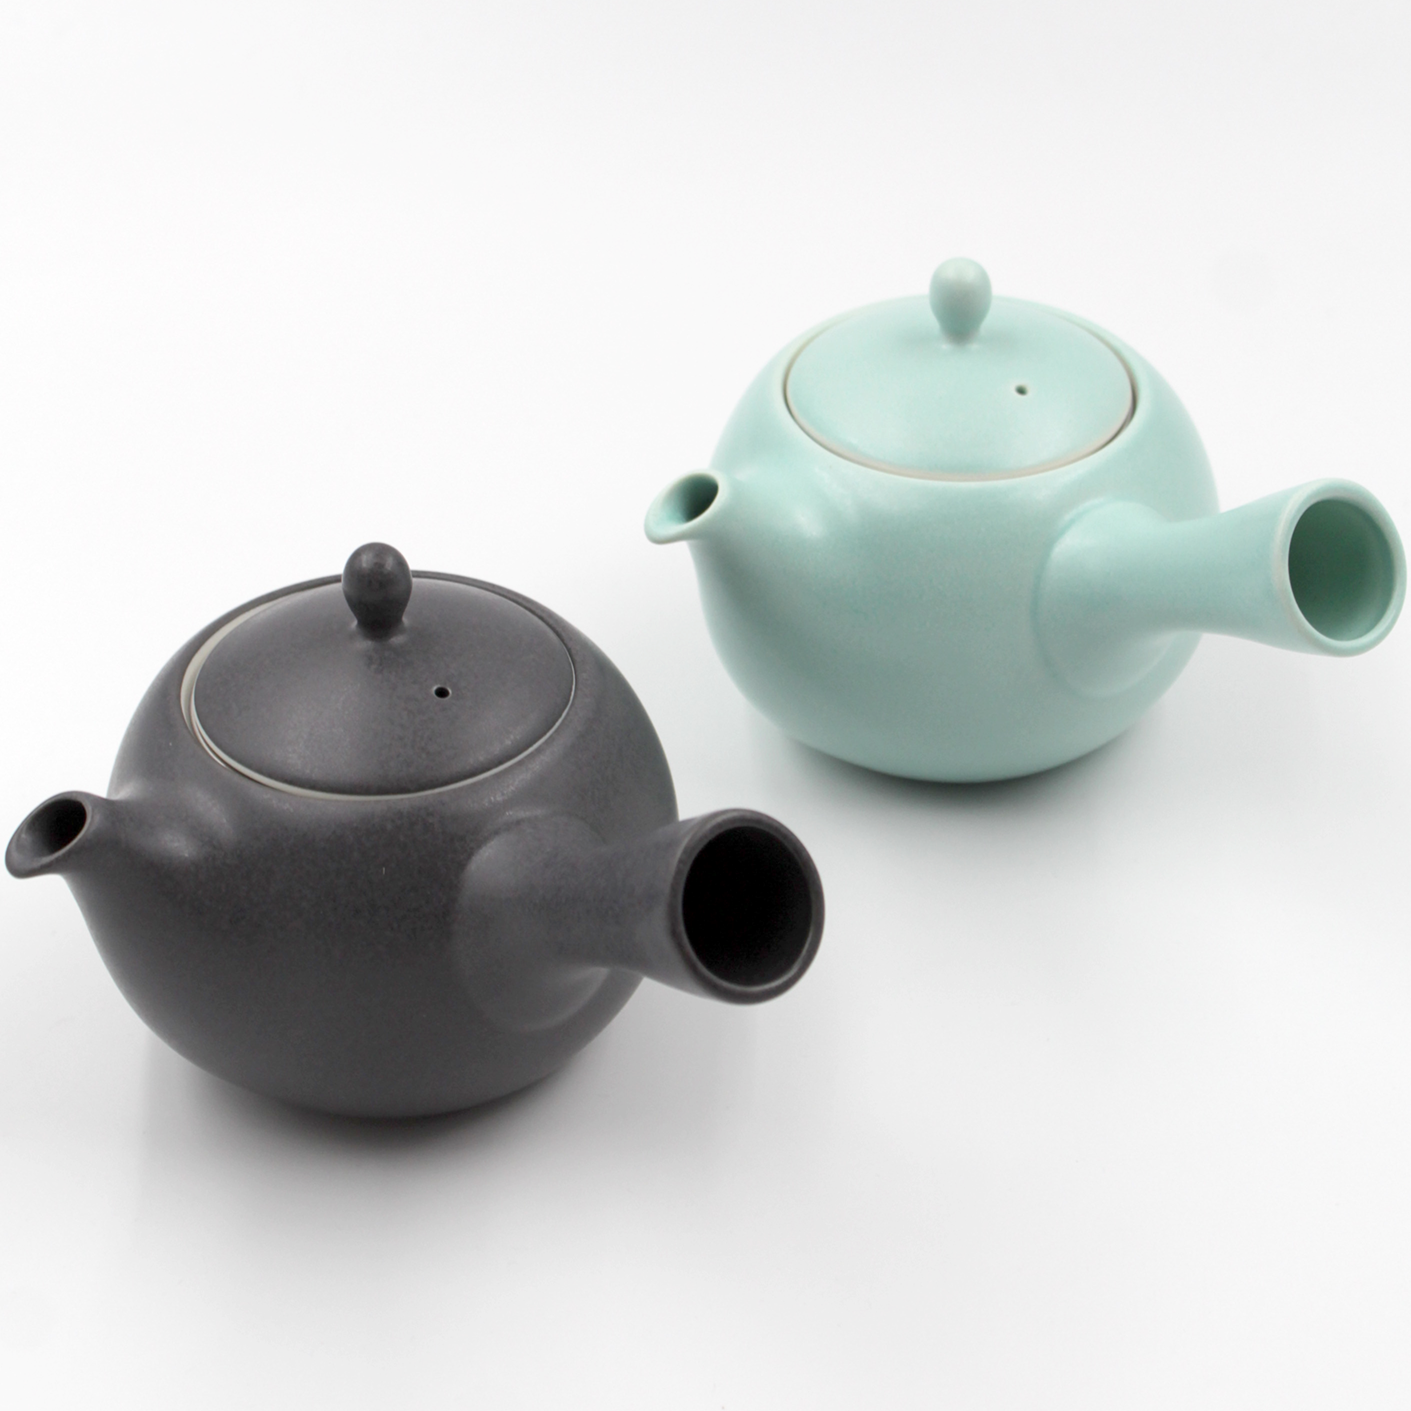 10 Unique Teapots and Cute Teapots Steeped in Originality